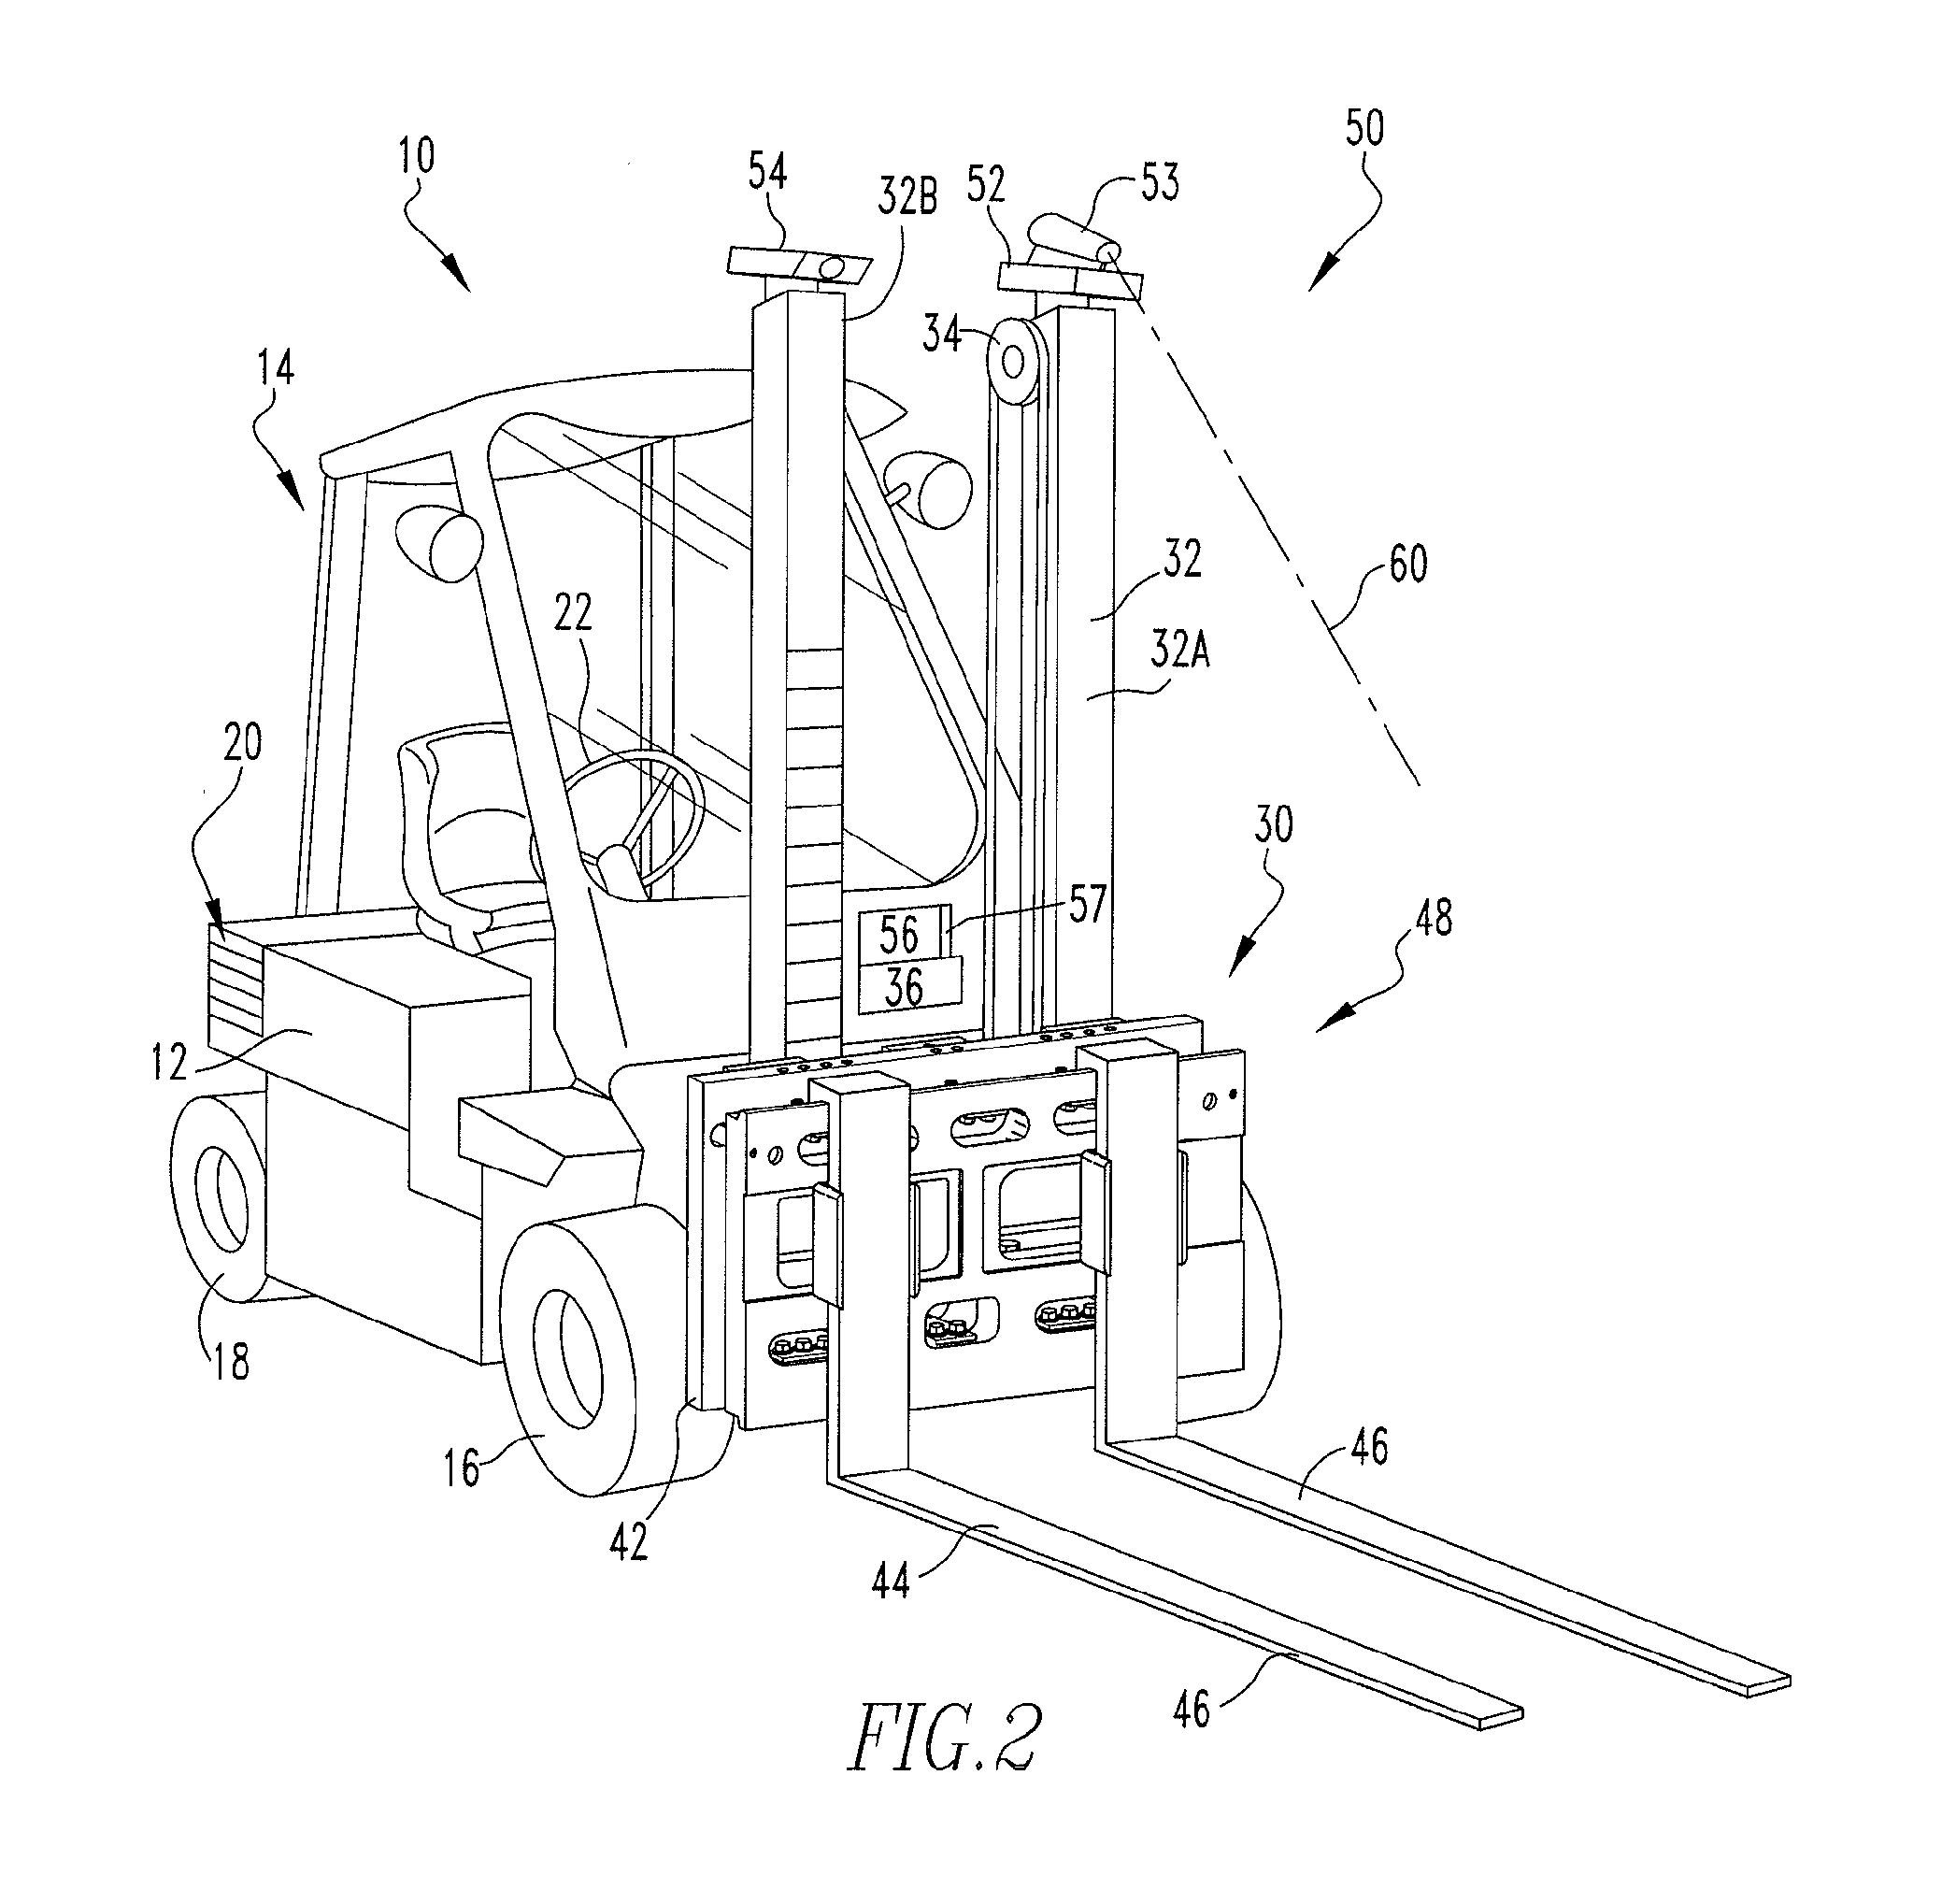 Dimensional Detection System and Associated Method